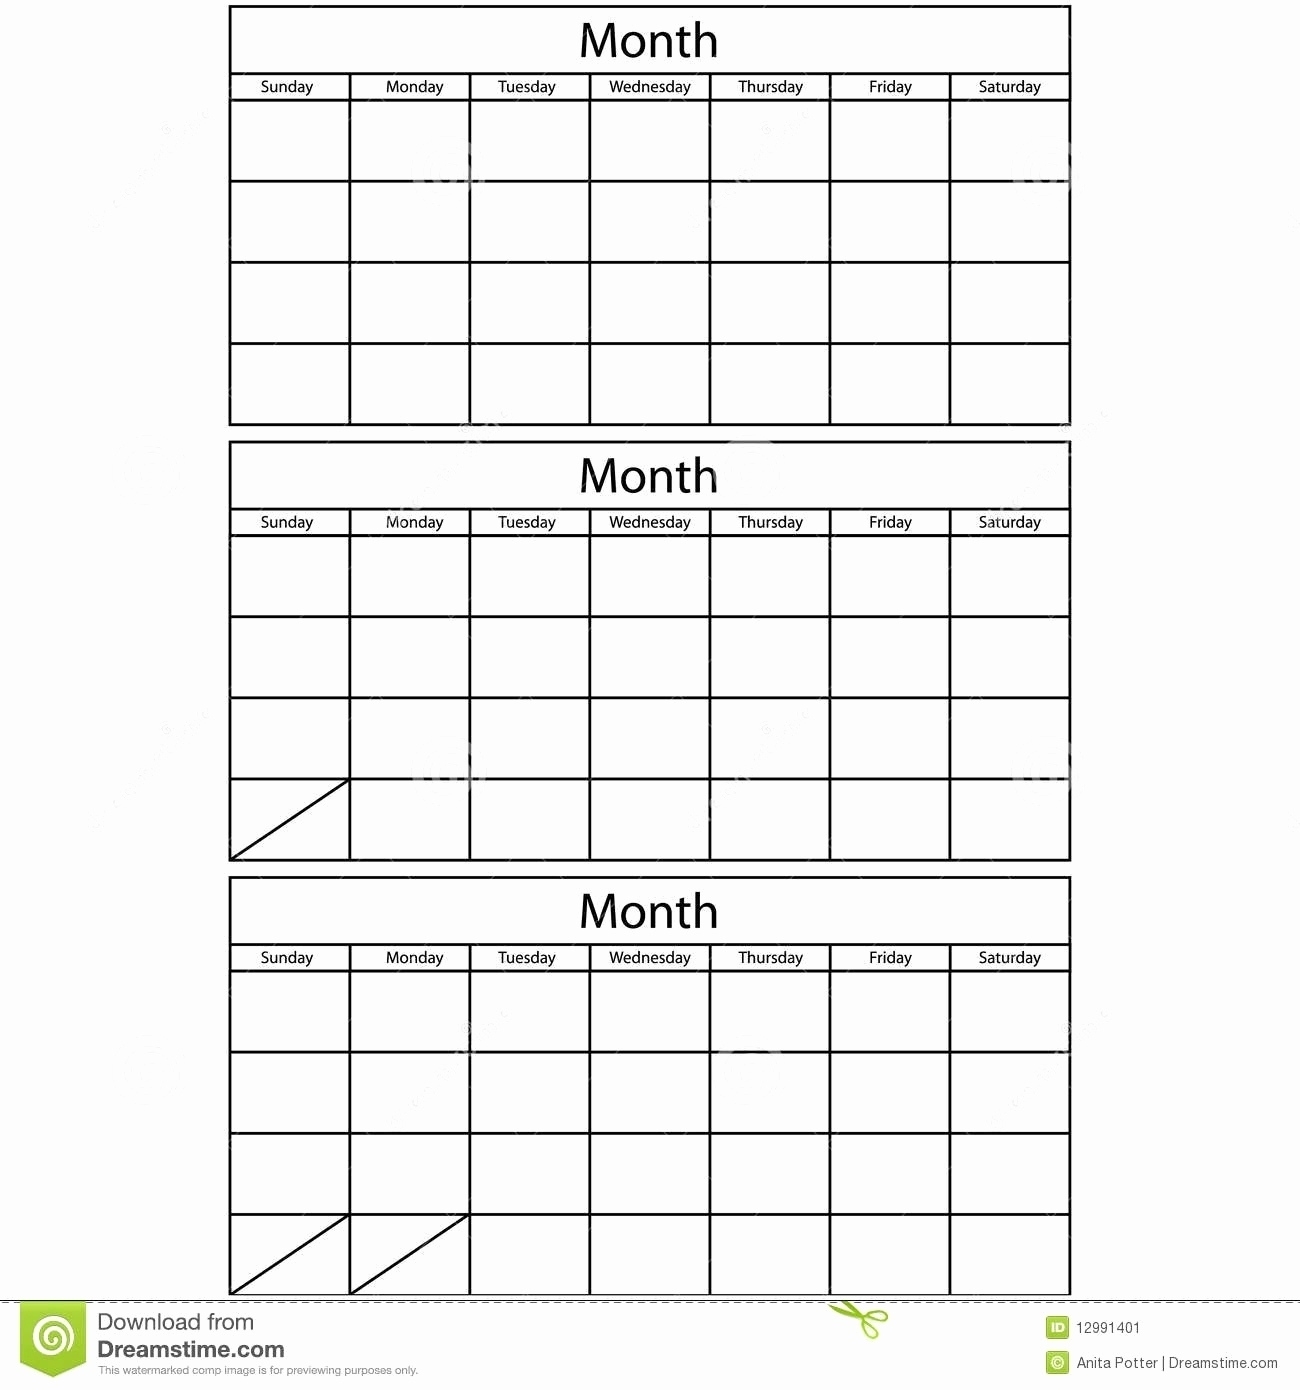 Blank Monthly Lanner Template Calendars To Rint Free Excel Download with Editable Free Blank Monthly Calendar Template